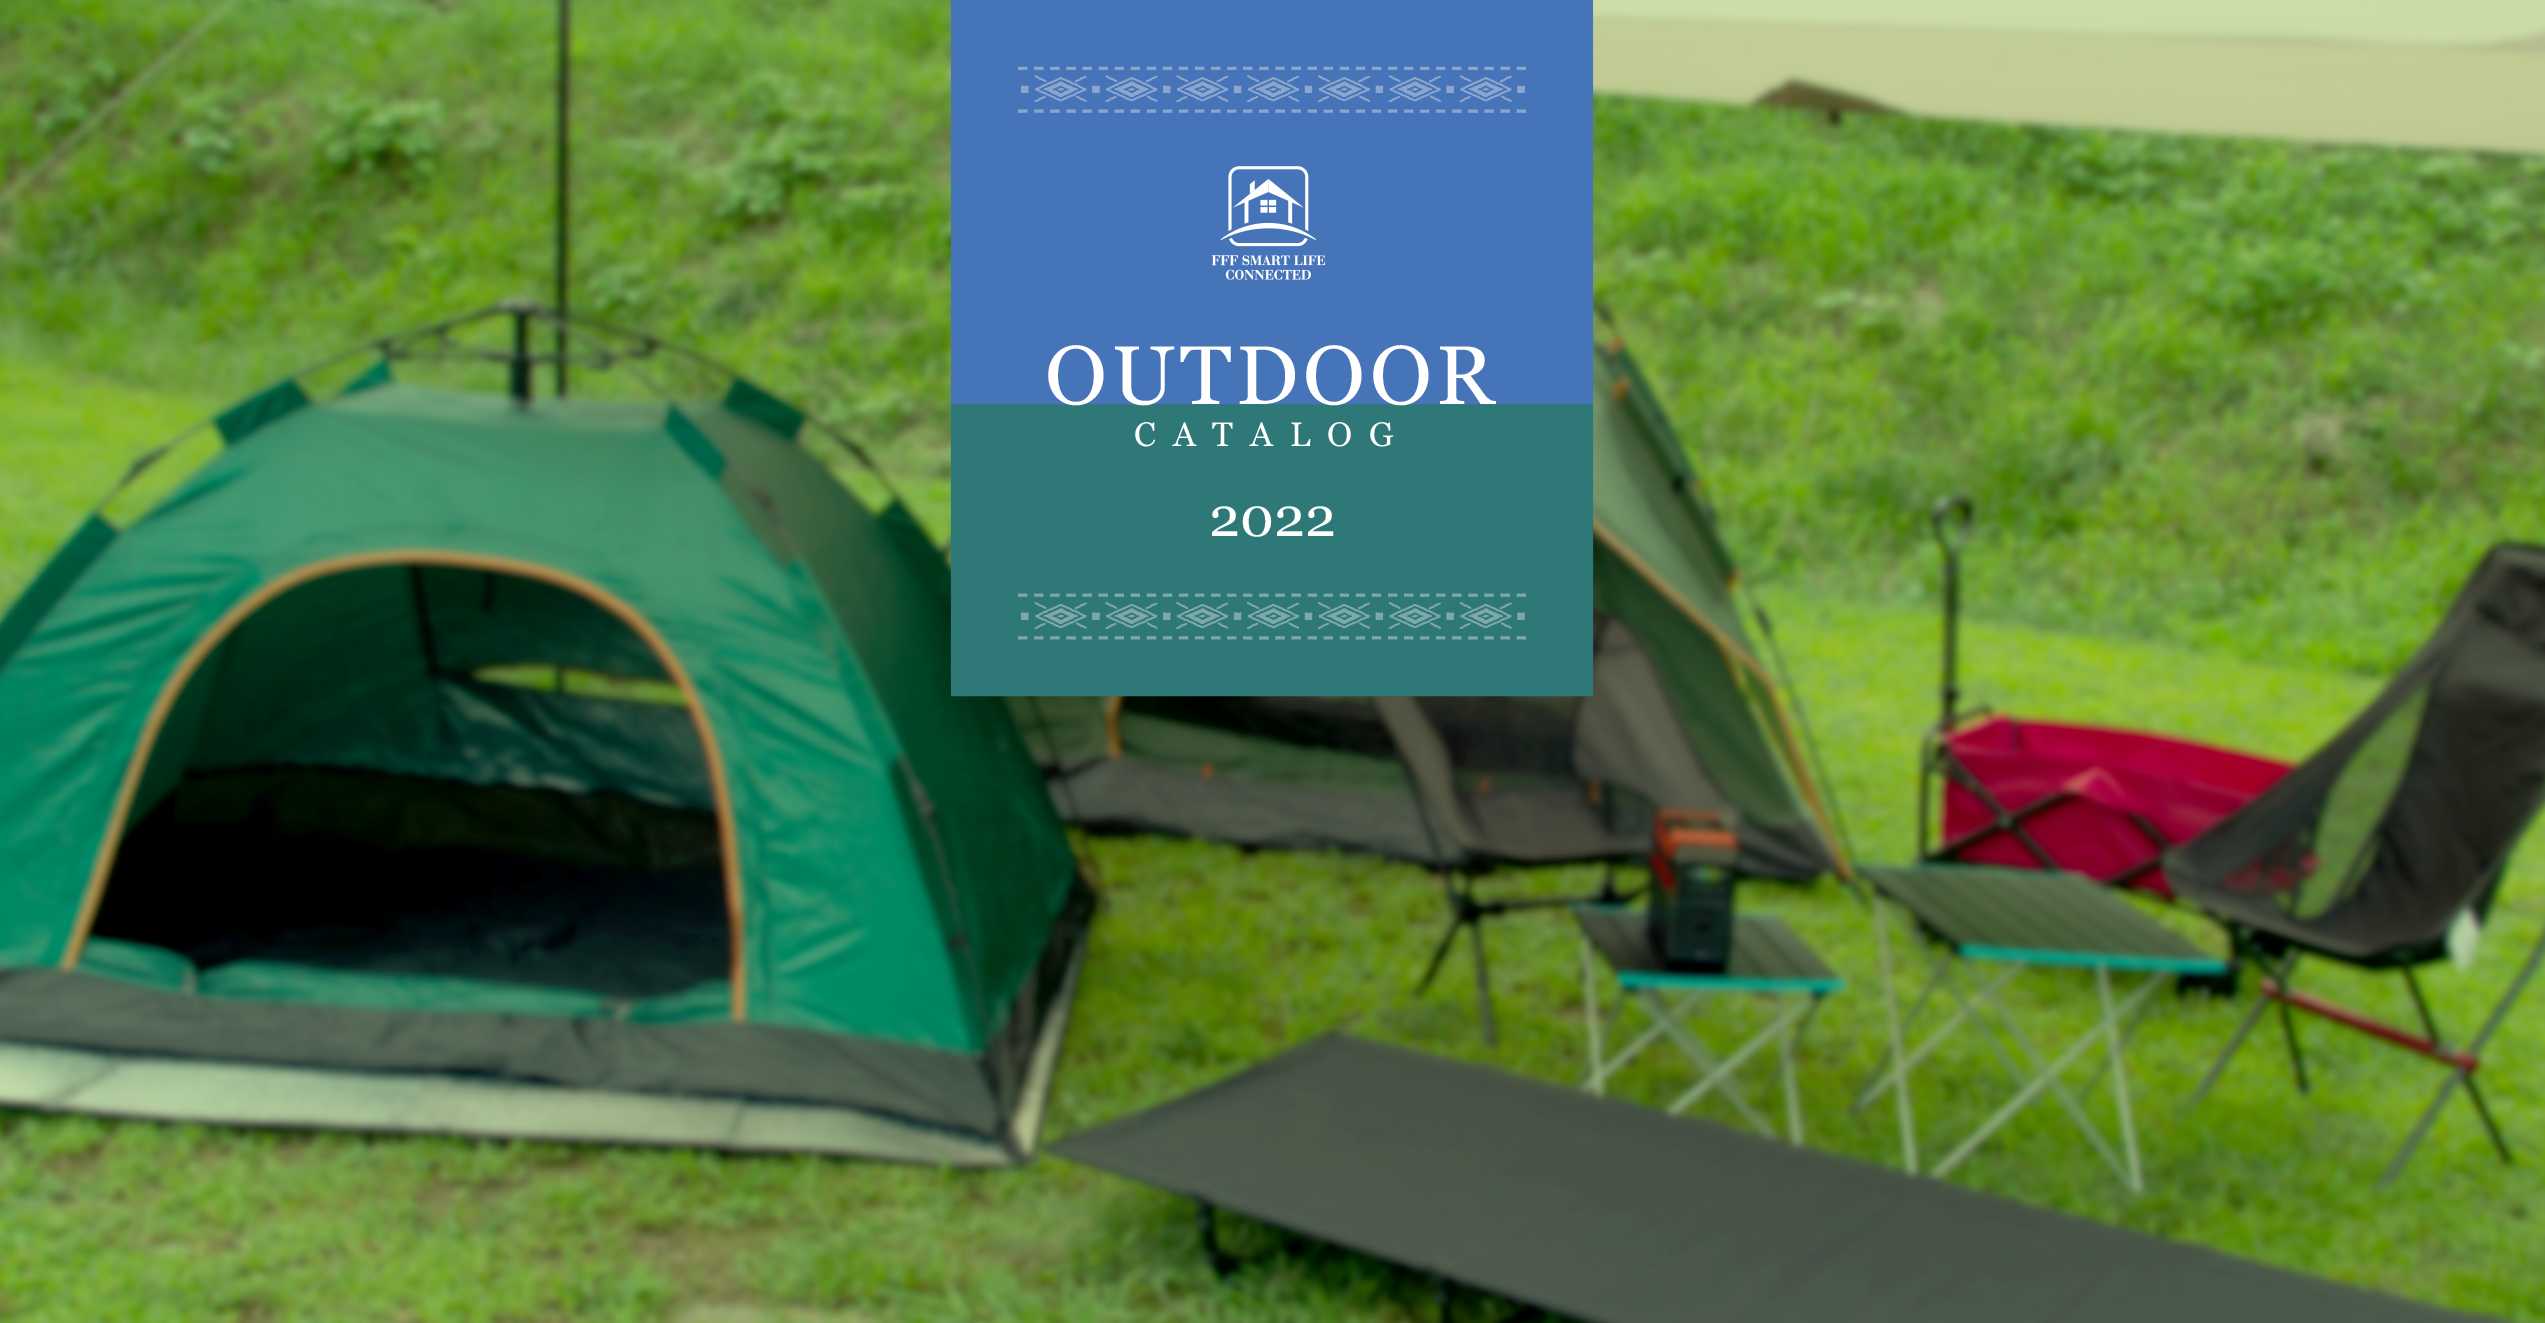 FFF SMART LIFE CONNECTED OUTDOOR CATALOG 2022